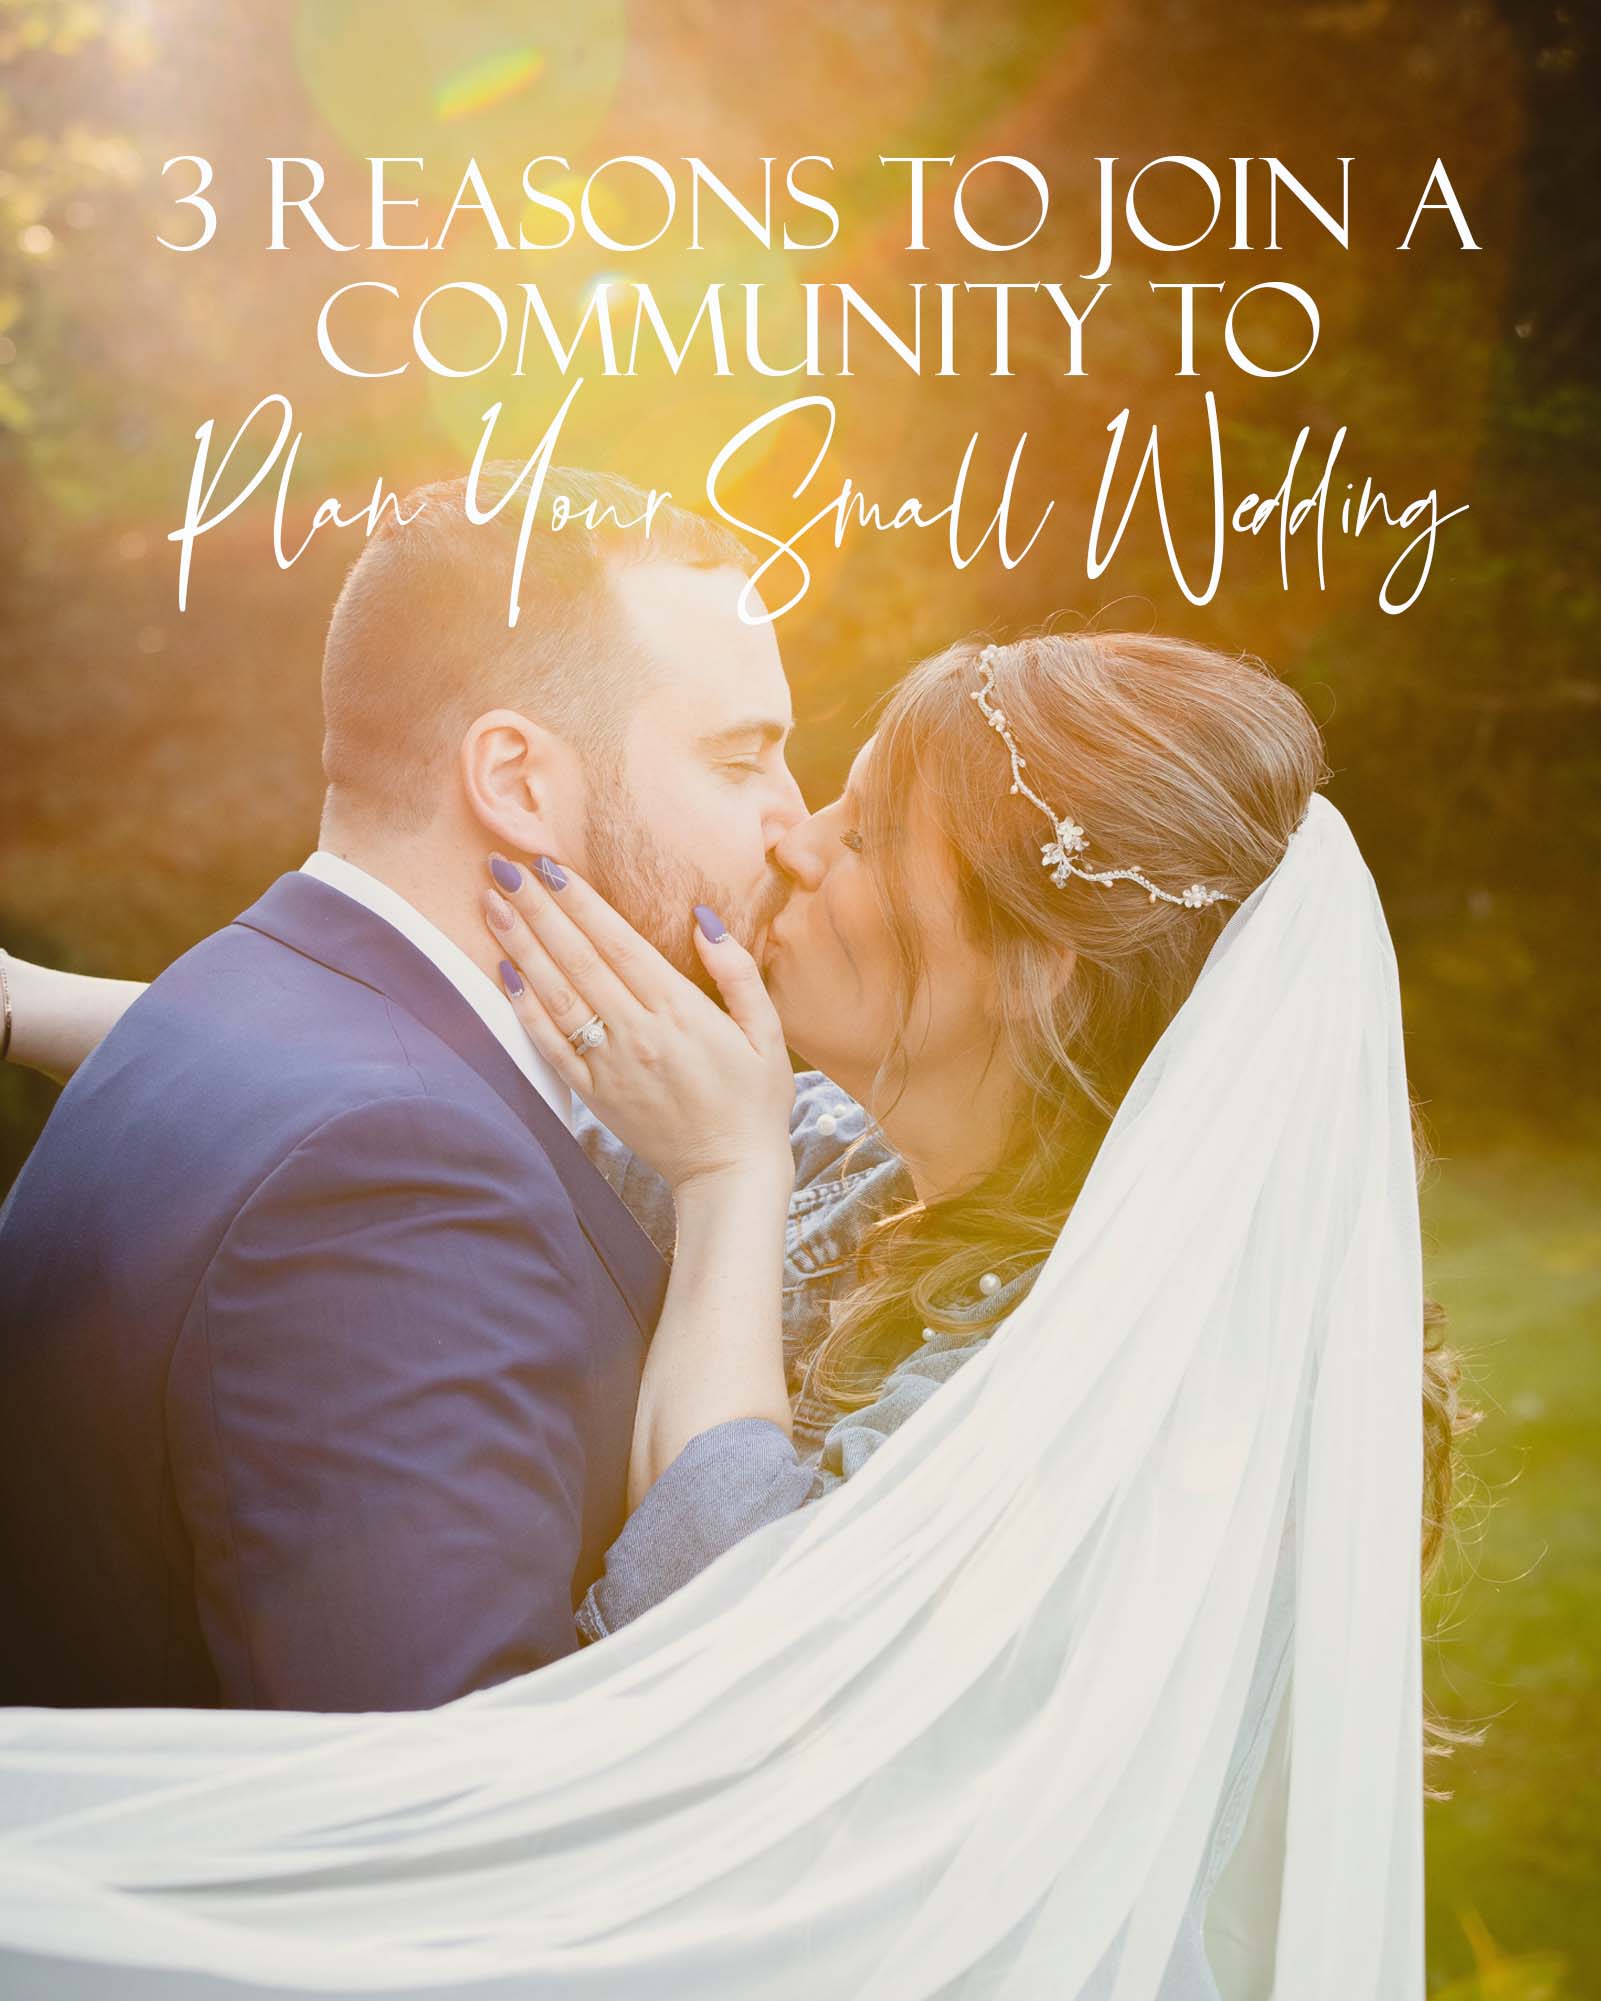 join small wedding 8x10 2 It can feel even harder when you're planning an elopement or small wedding because there are so few resources out there for people planning those kinds of wedding days.